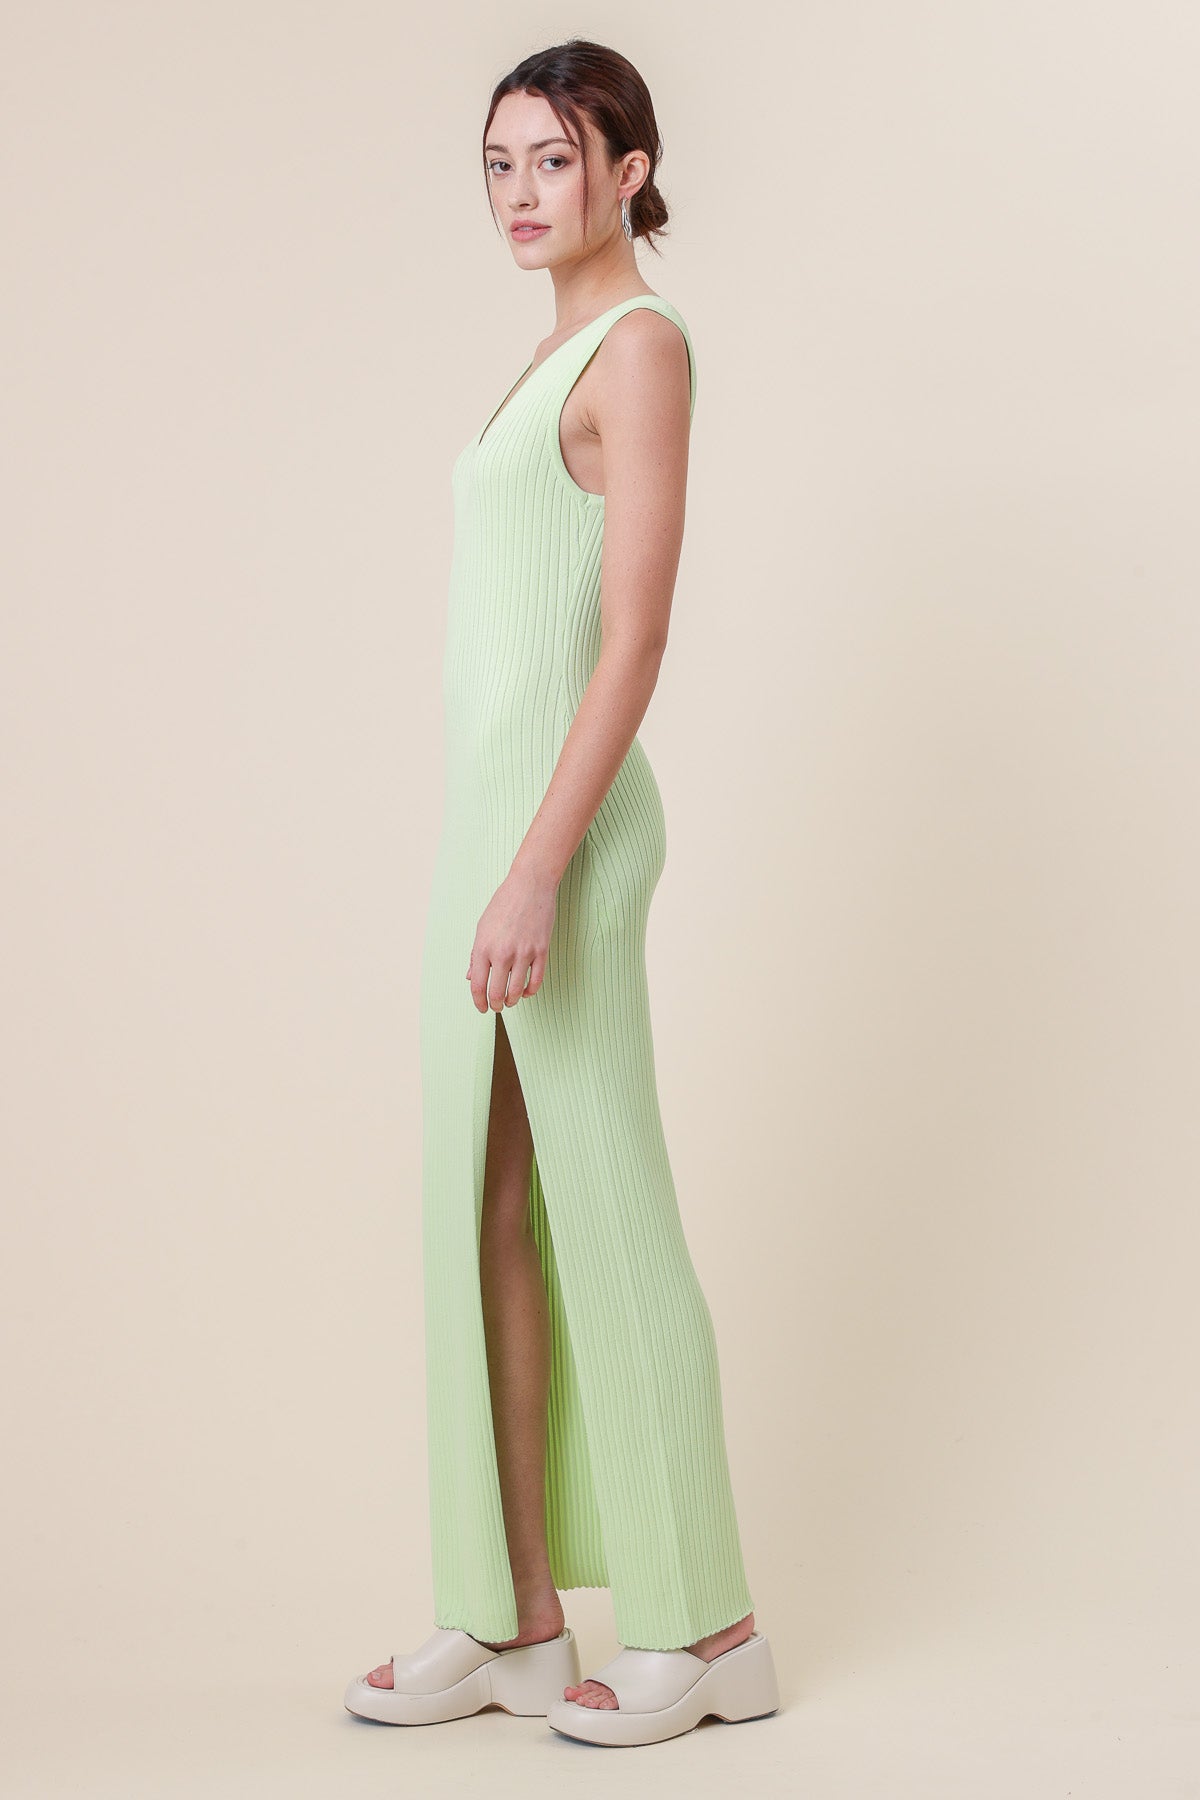 Halo Knit Maxi Dress in Lime